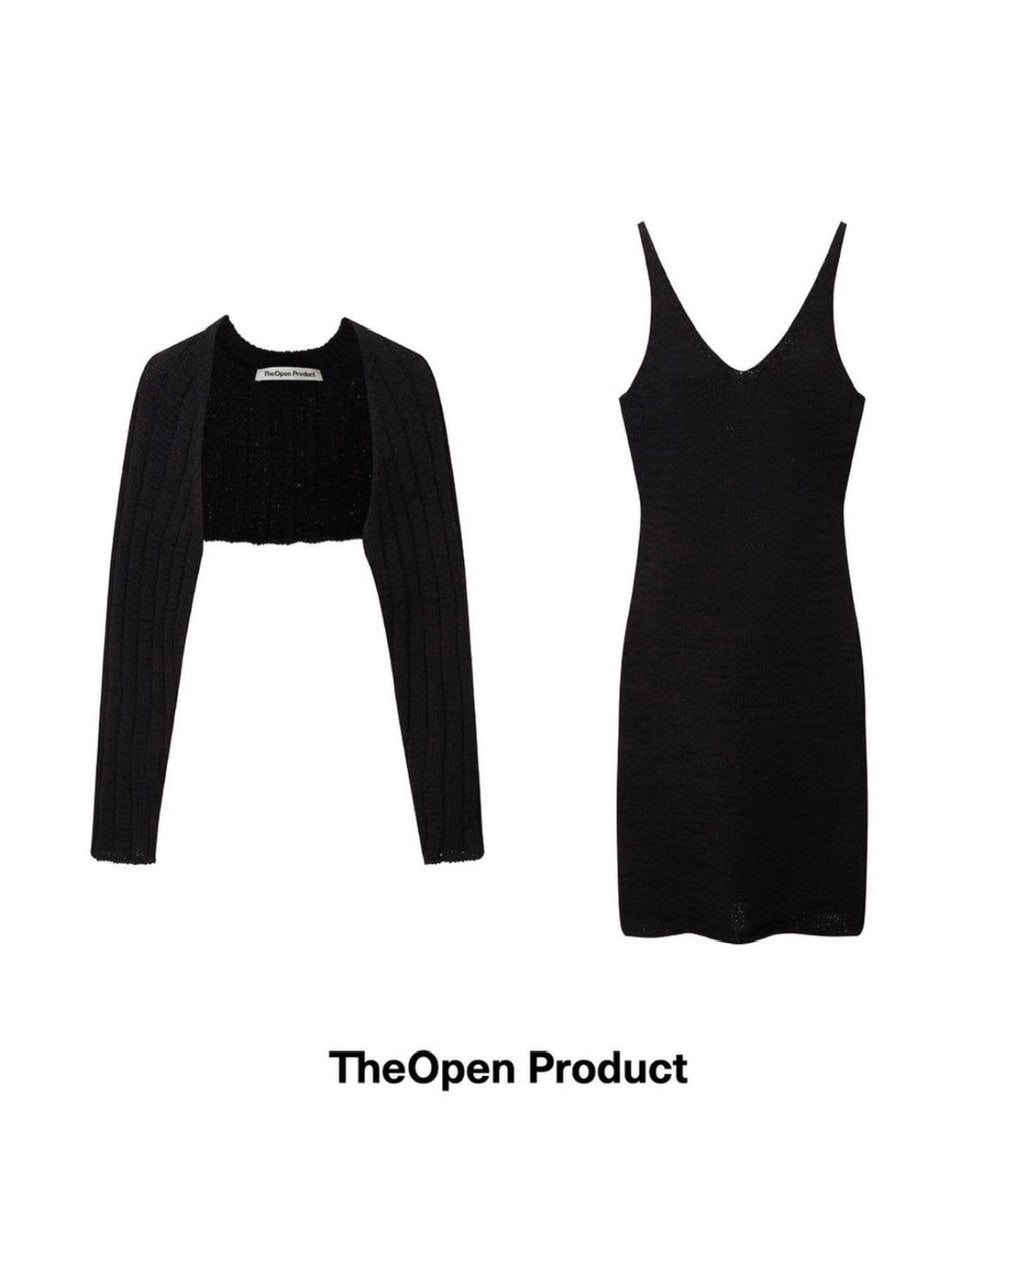 COTTON RIBBED BOLERO KNIT TOP BY THEOPEN PRODUCT IN BLACK